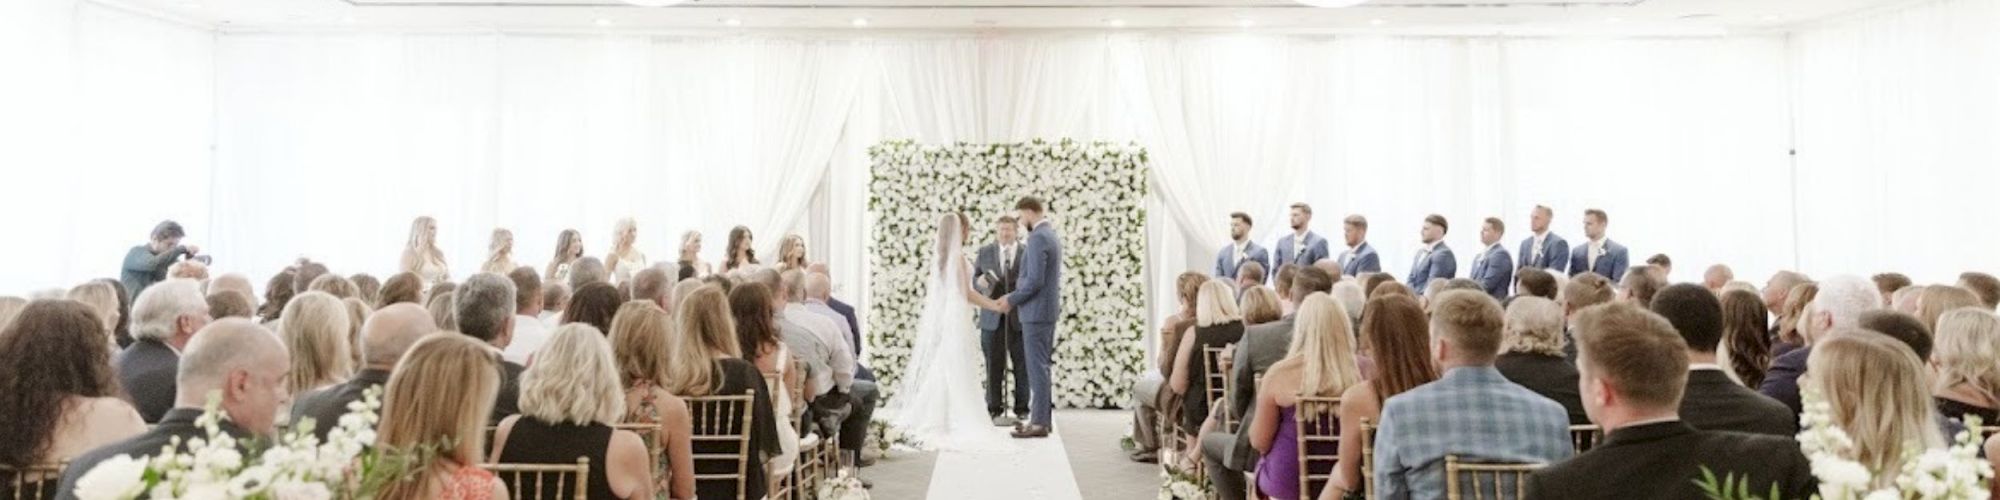 A wedding ceremony with a bride and groom standing at the altar, surrounded by bridesmaids, groomsmen, and seated guests.